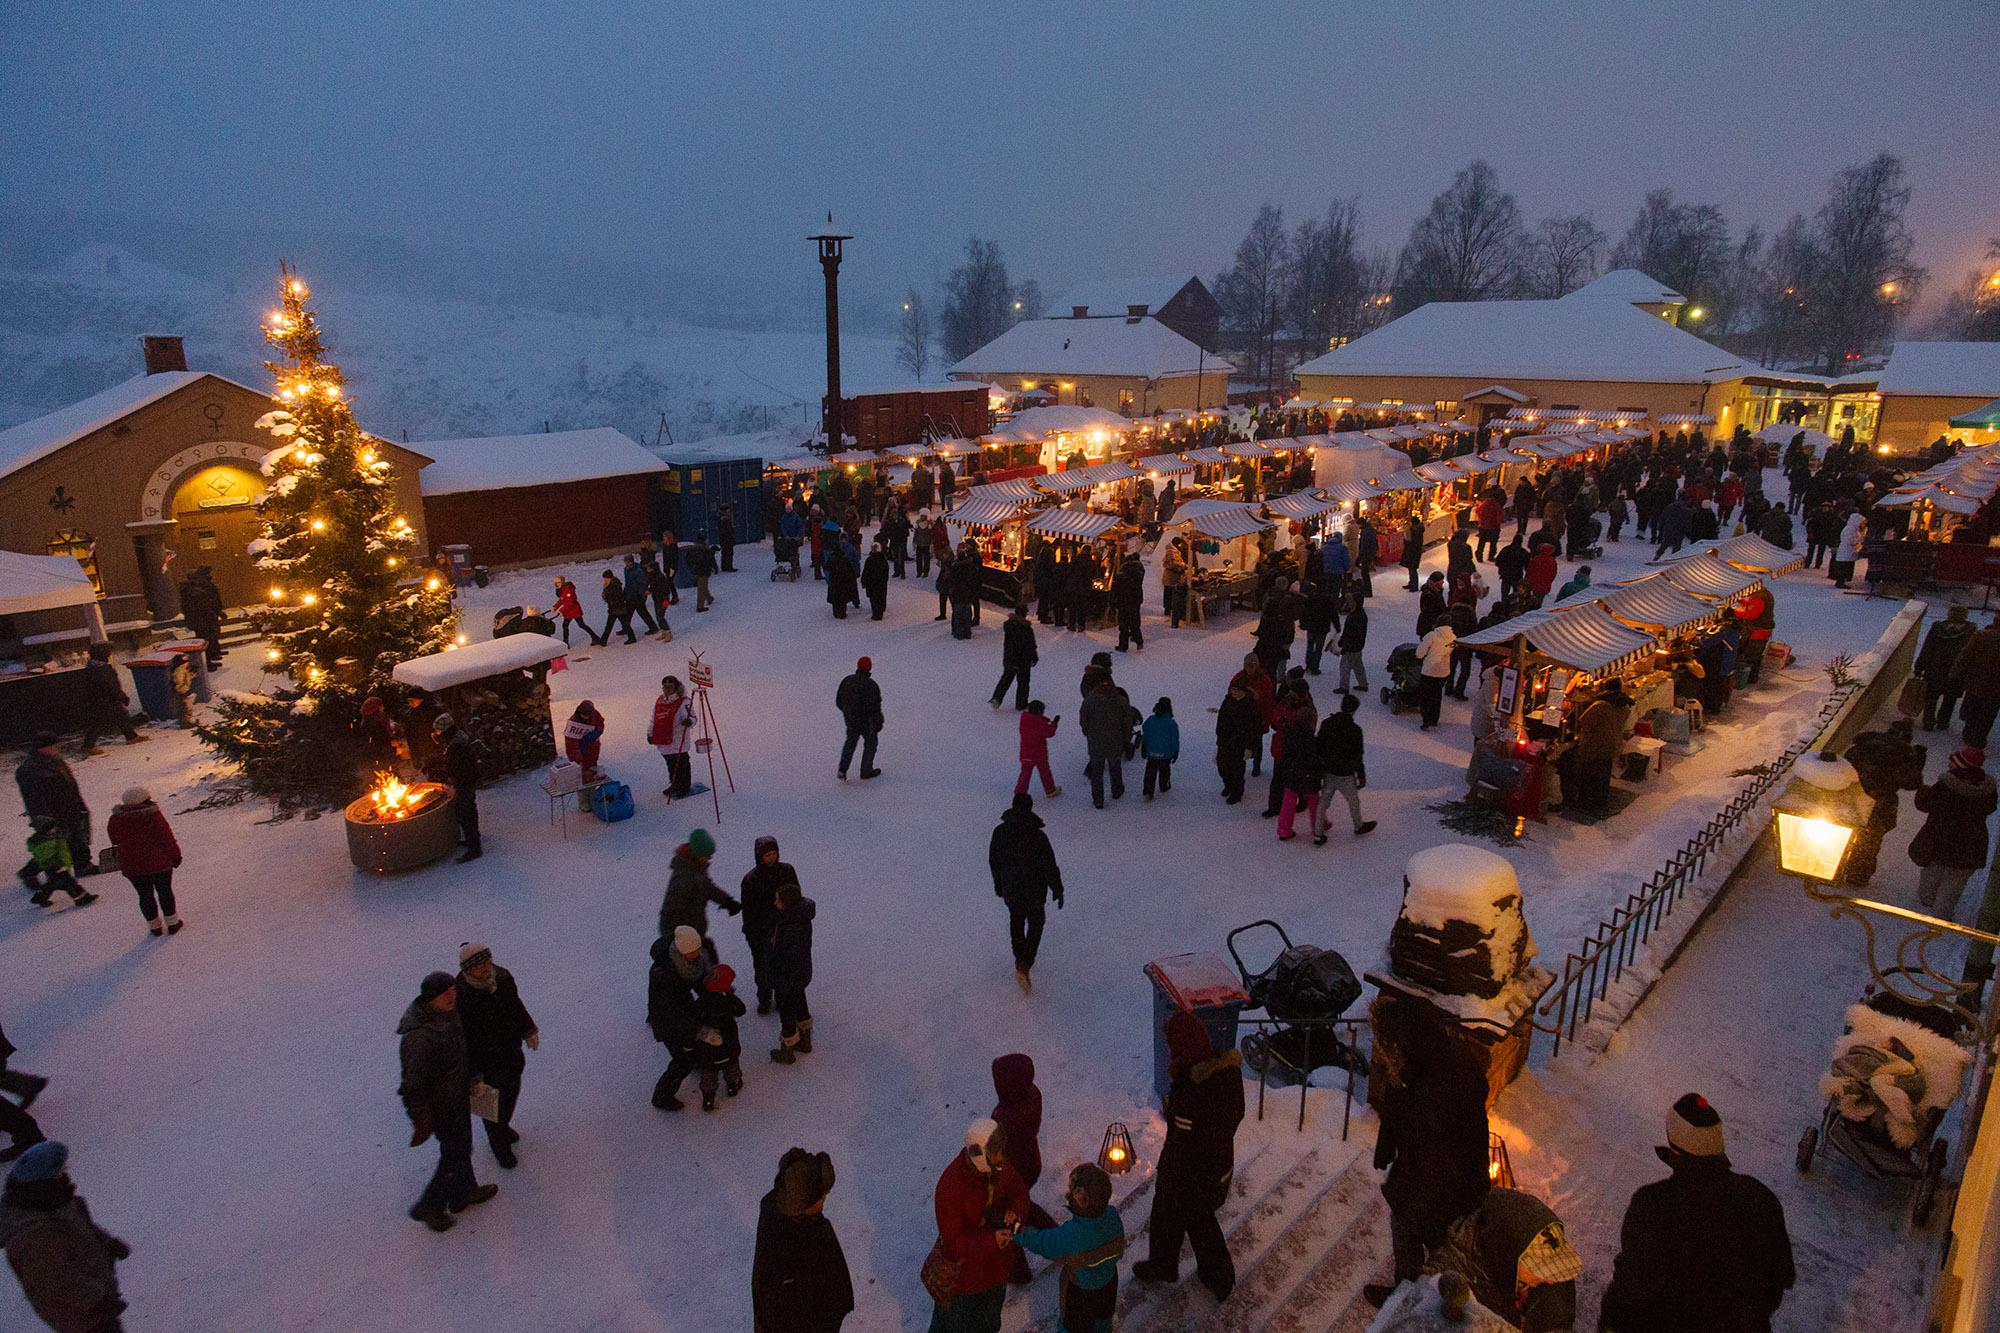 The Christmas Fair at Falun Mine has been running for 15 years. – © Per Eriksson